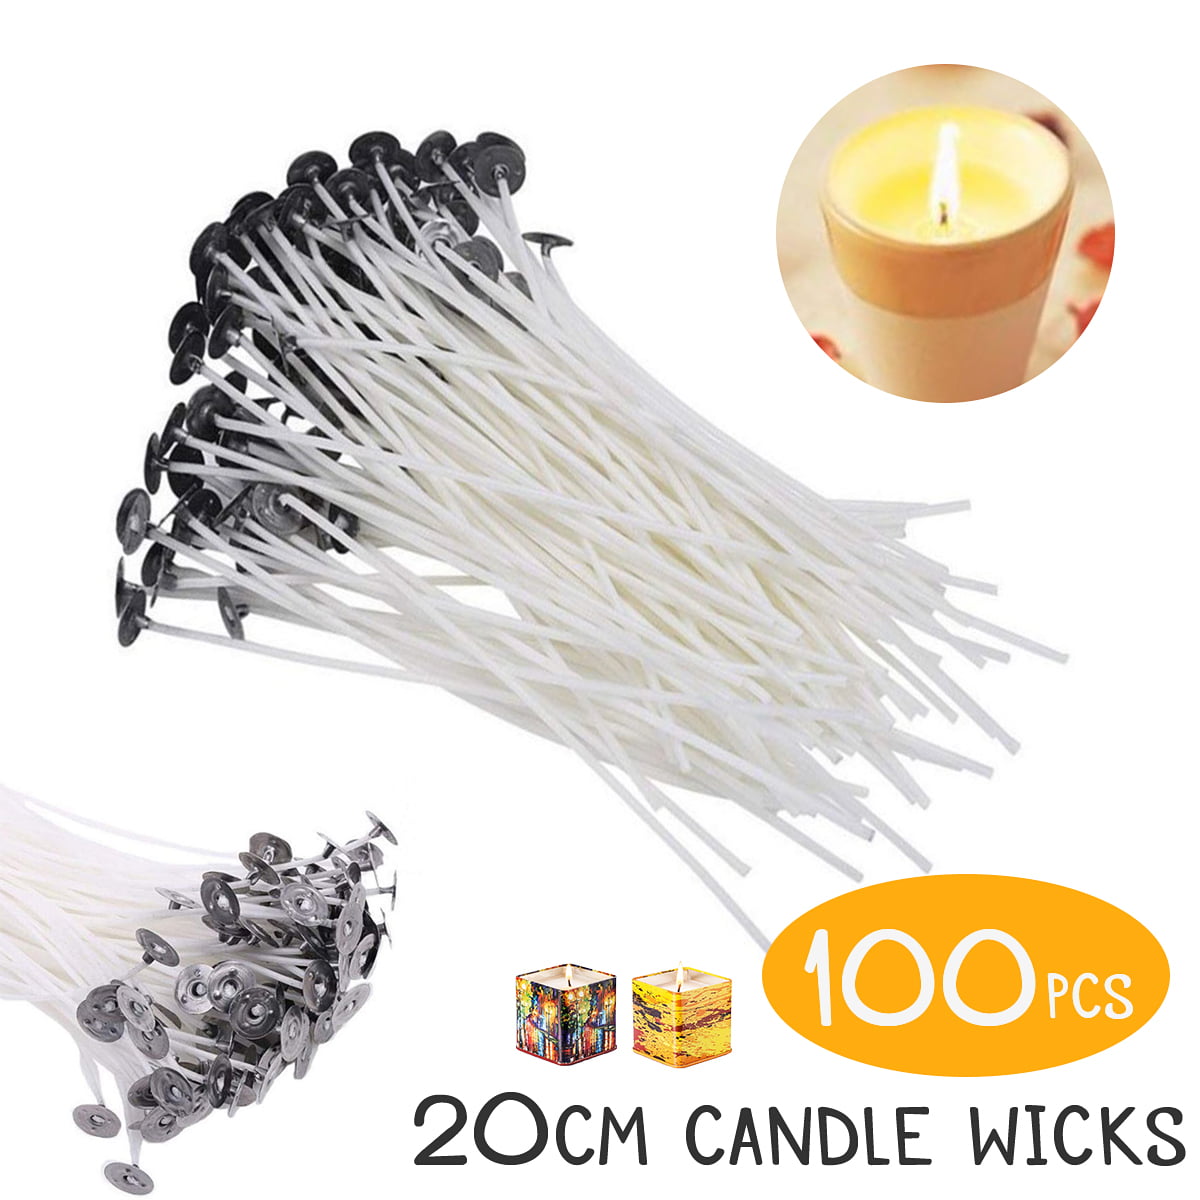 100x Candle Wick Pretabbed White Cotton Core Waxed With Sustainers for Making 